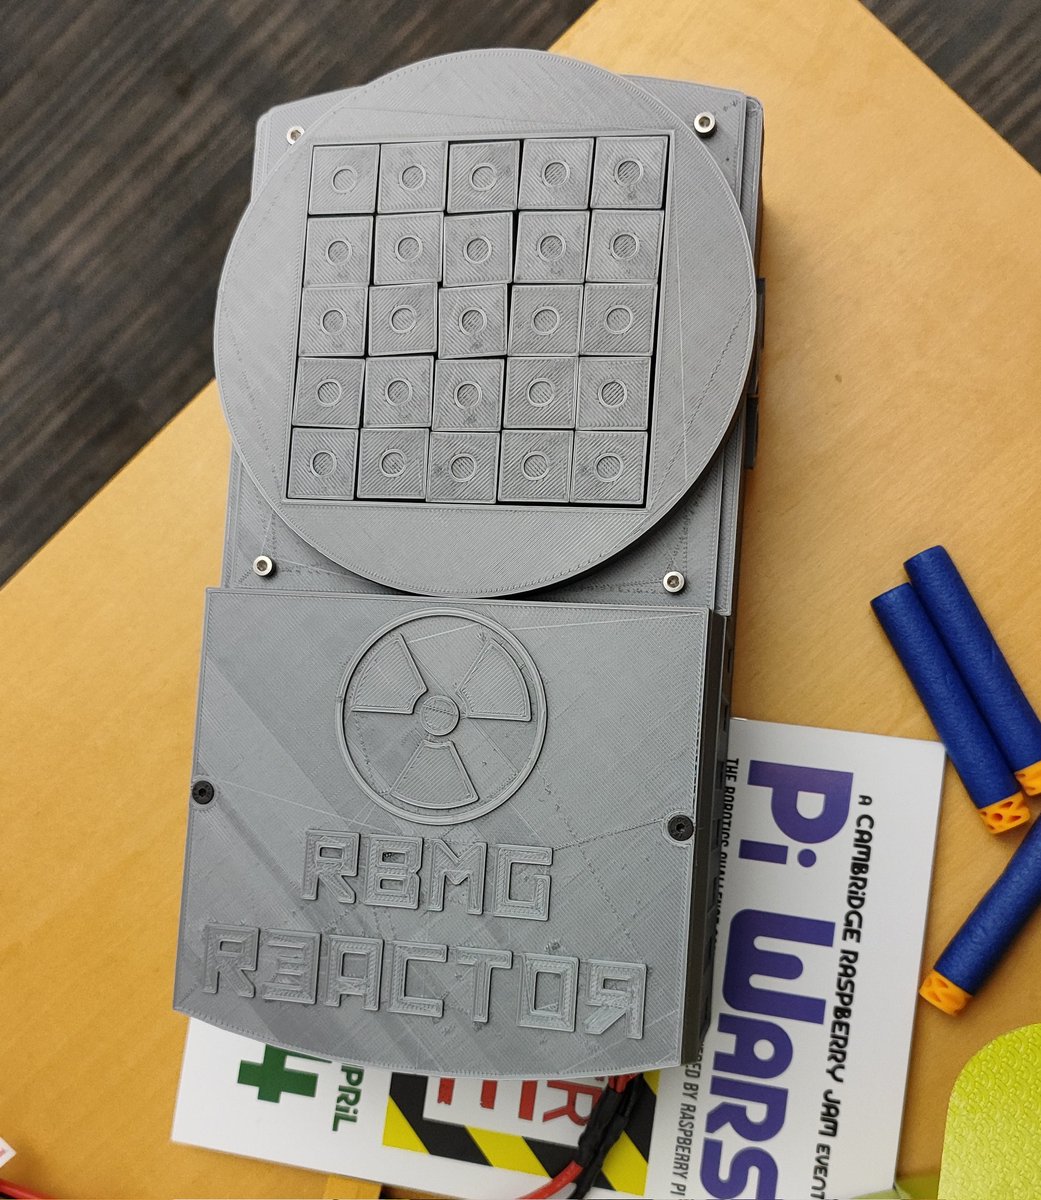 This was fun! Graveney Robotics Club's Reactor is a series of rods, yes like a nuclear reactor. The rods move up and down and are remotely controlled via @microbit_edu Under the hood, a Pi pushes the rods to spell out words. Outstanding! @tomshardware #piwars